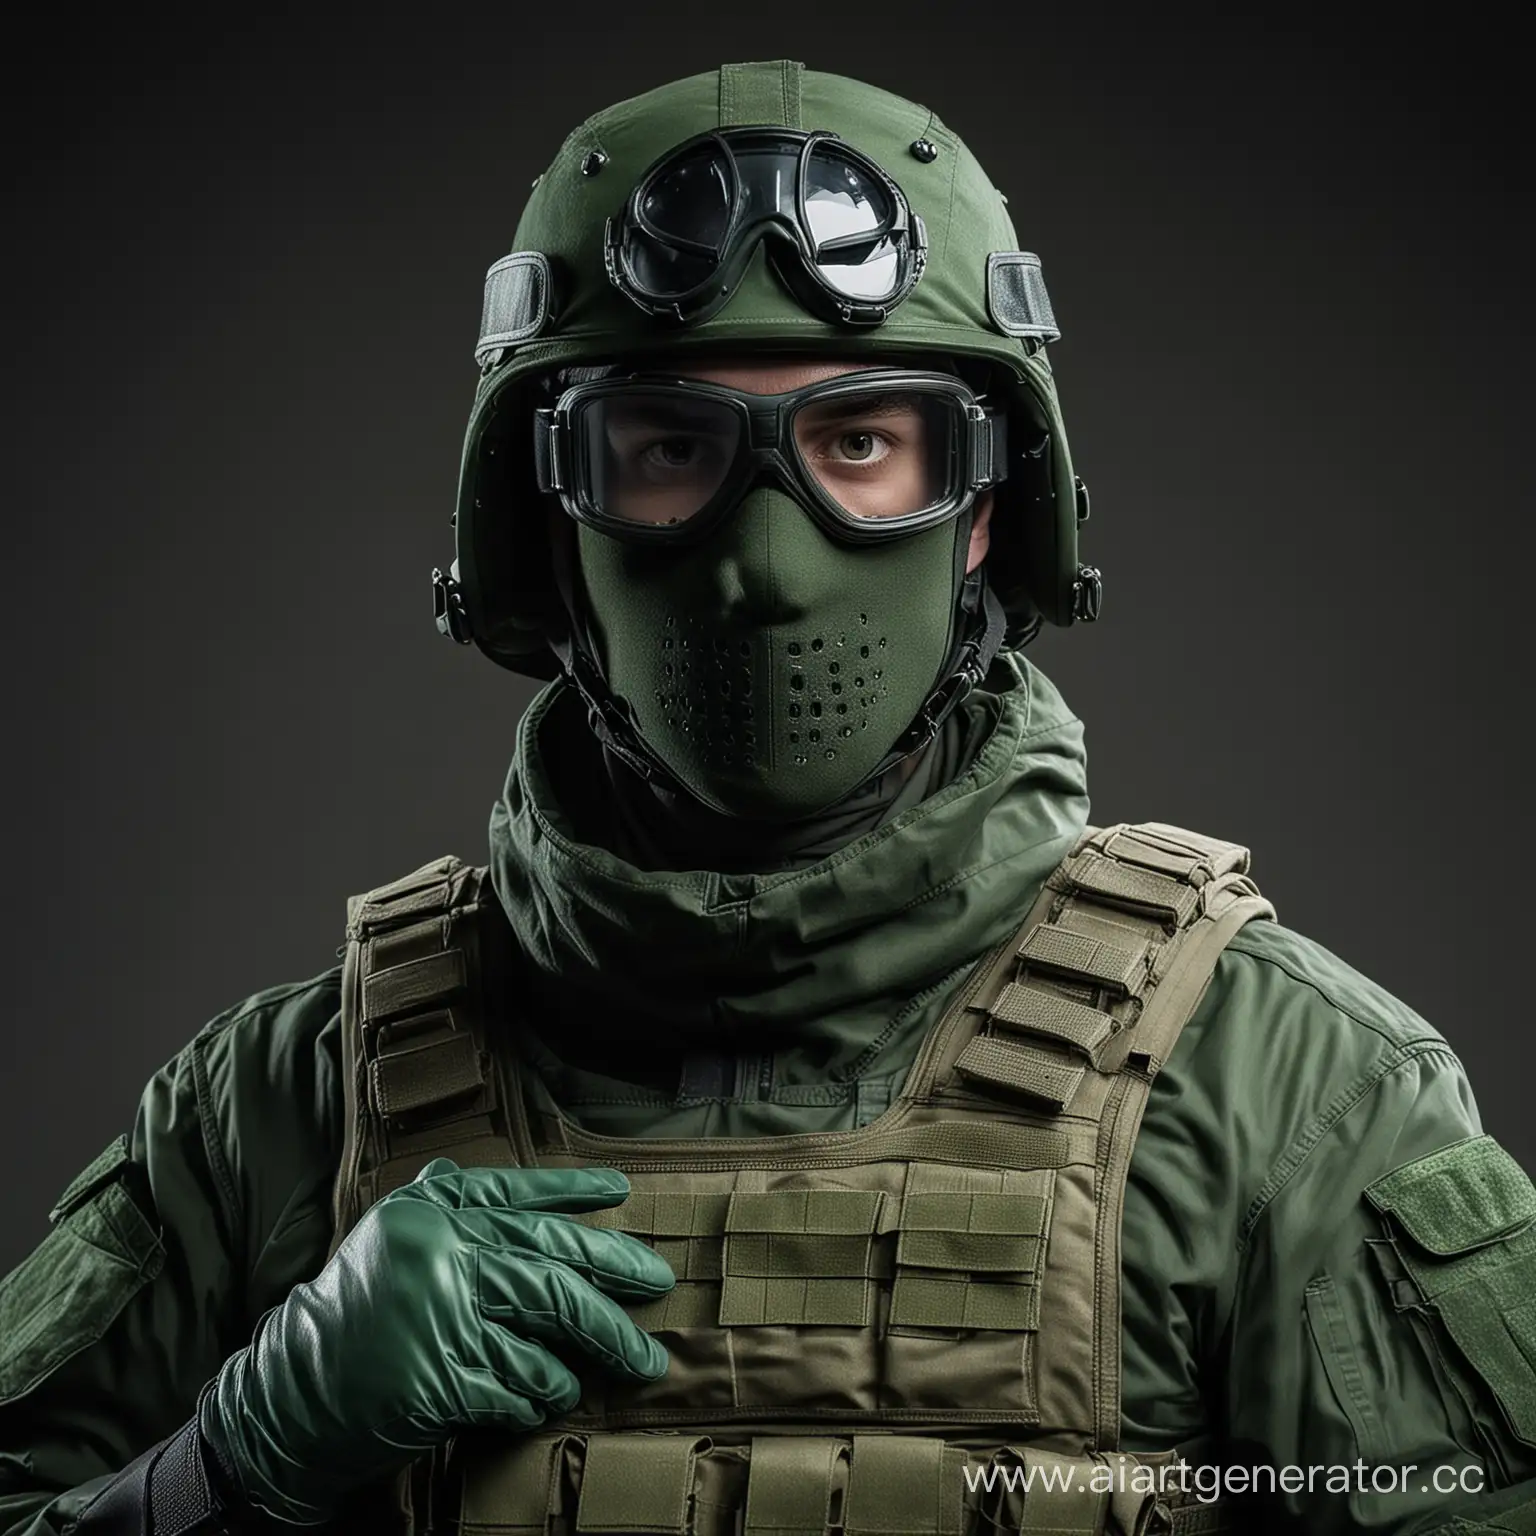 Russian-Soldier-in-Green-Tactical-Gear-with-Mask-and-Goggles